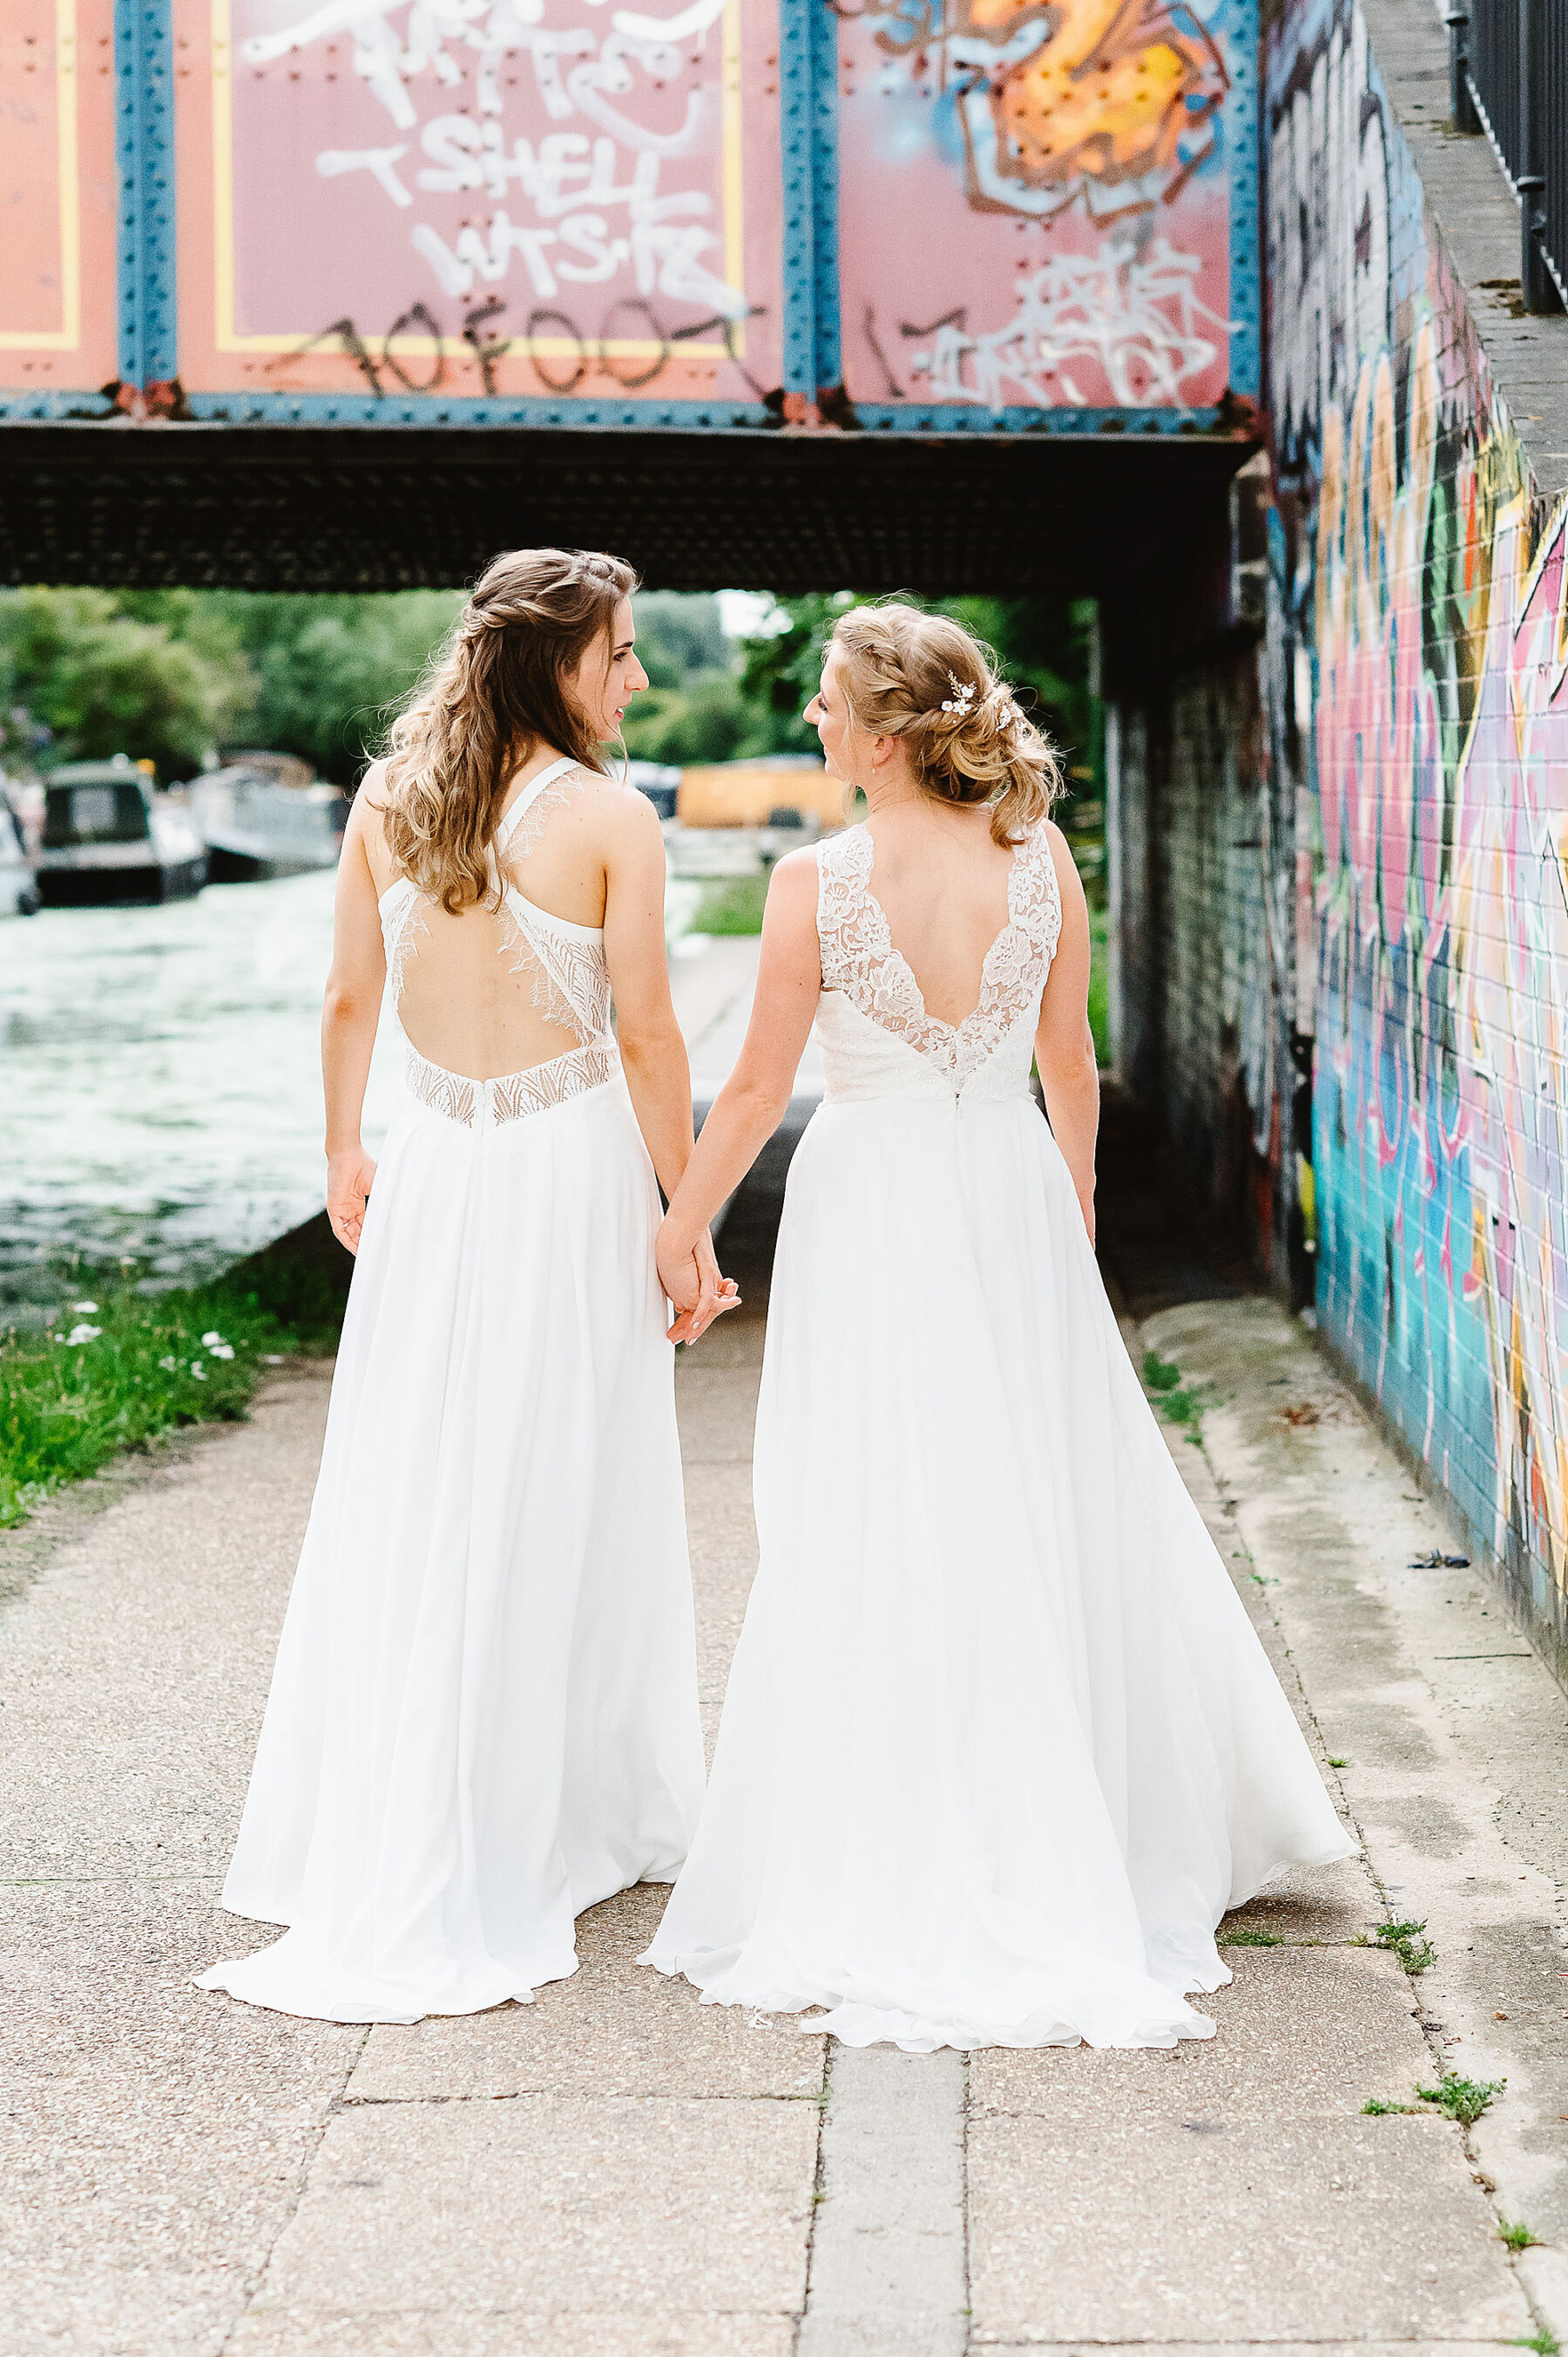 Back of two brides holding hands. LGBTQ wedding.